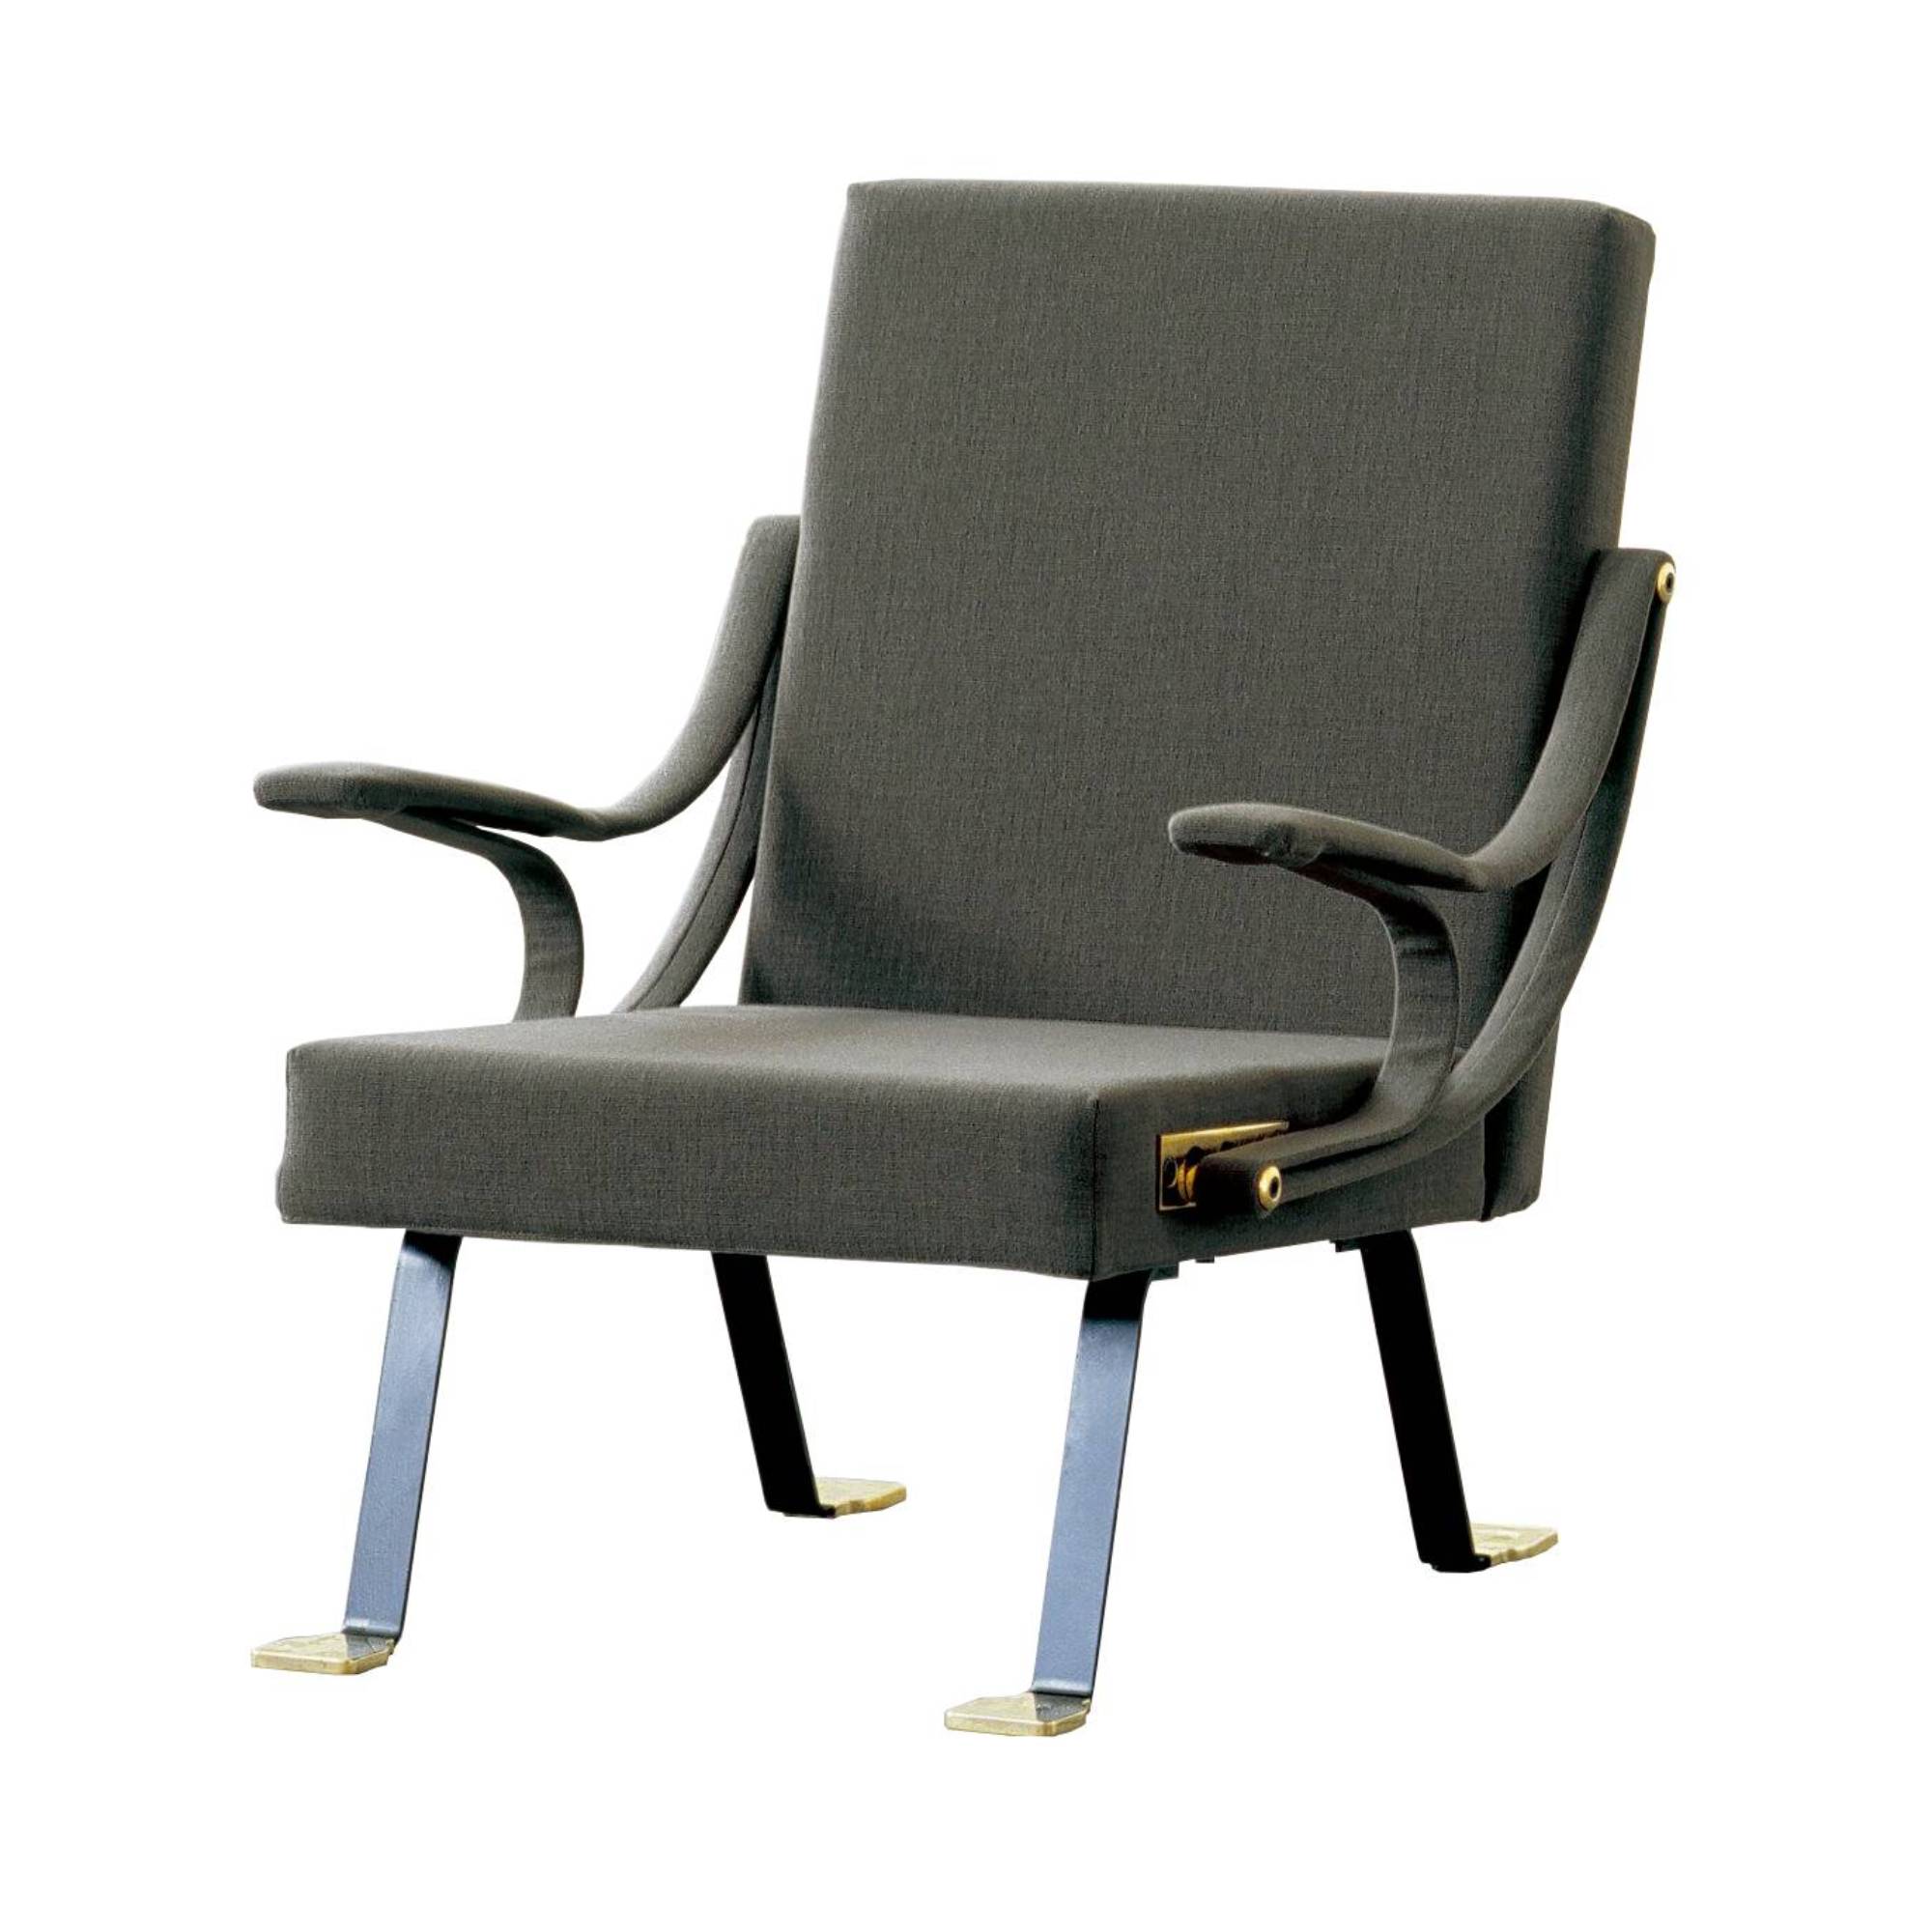 Digamma Armchair: Connect